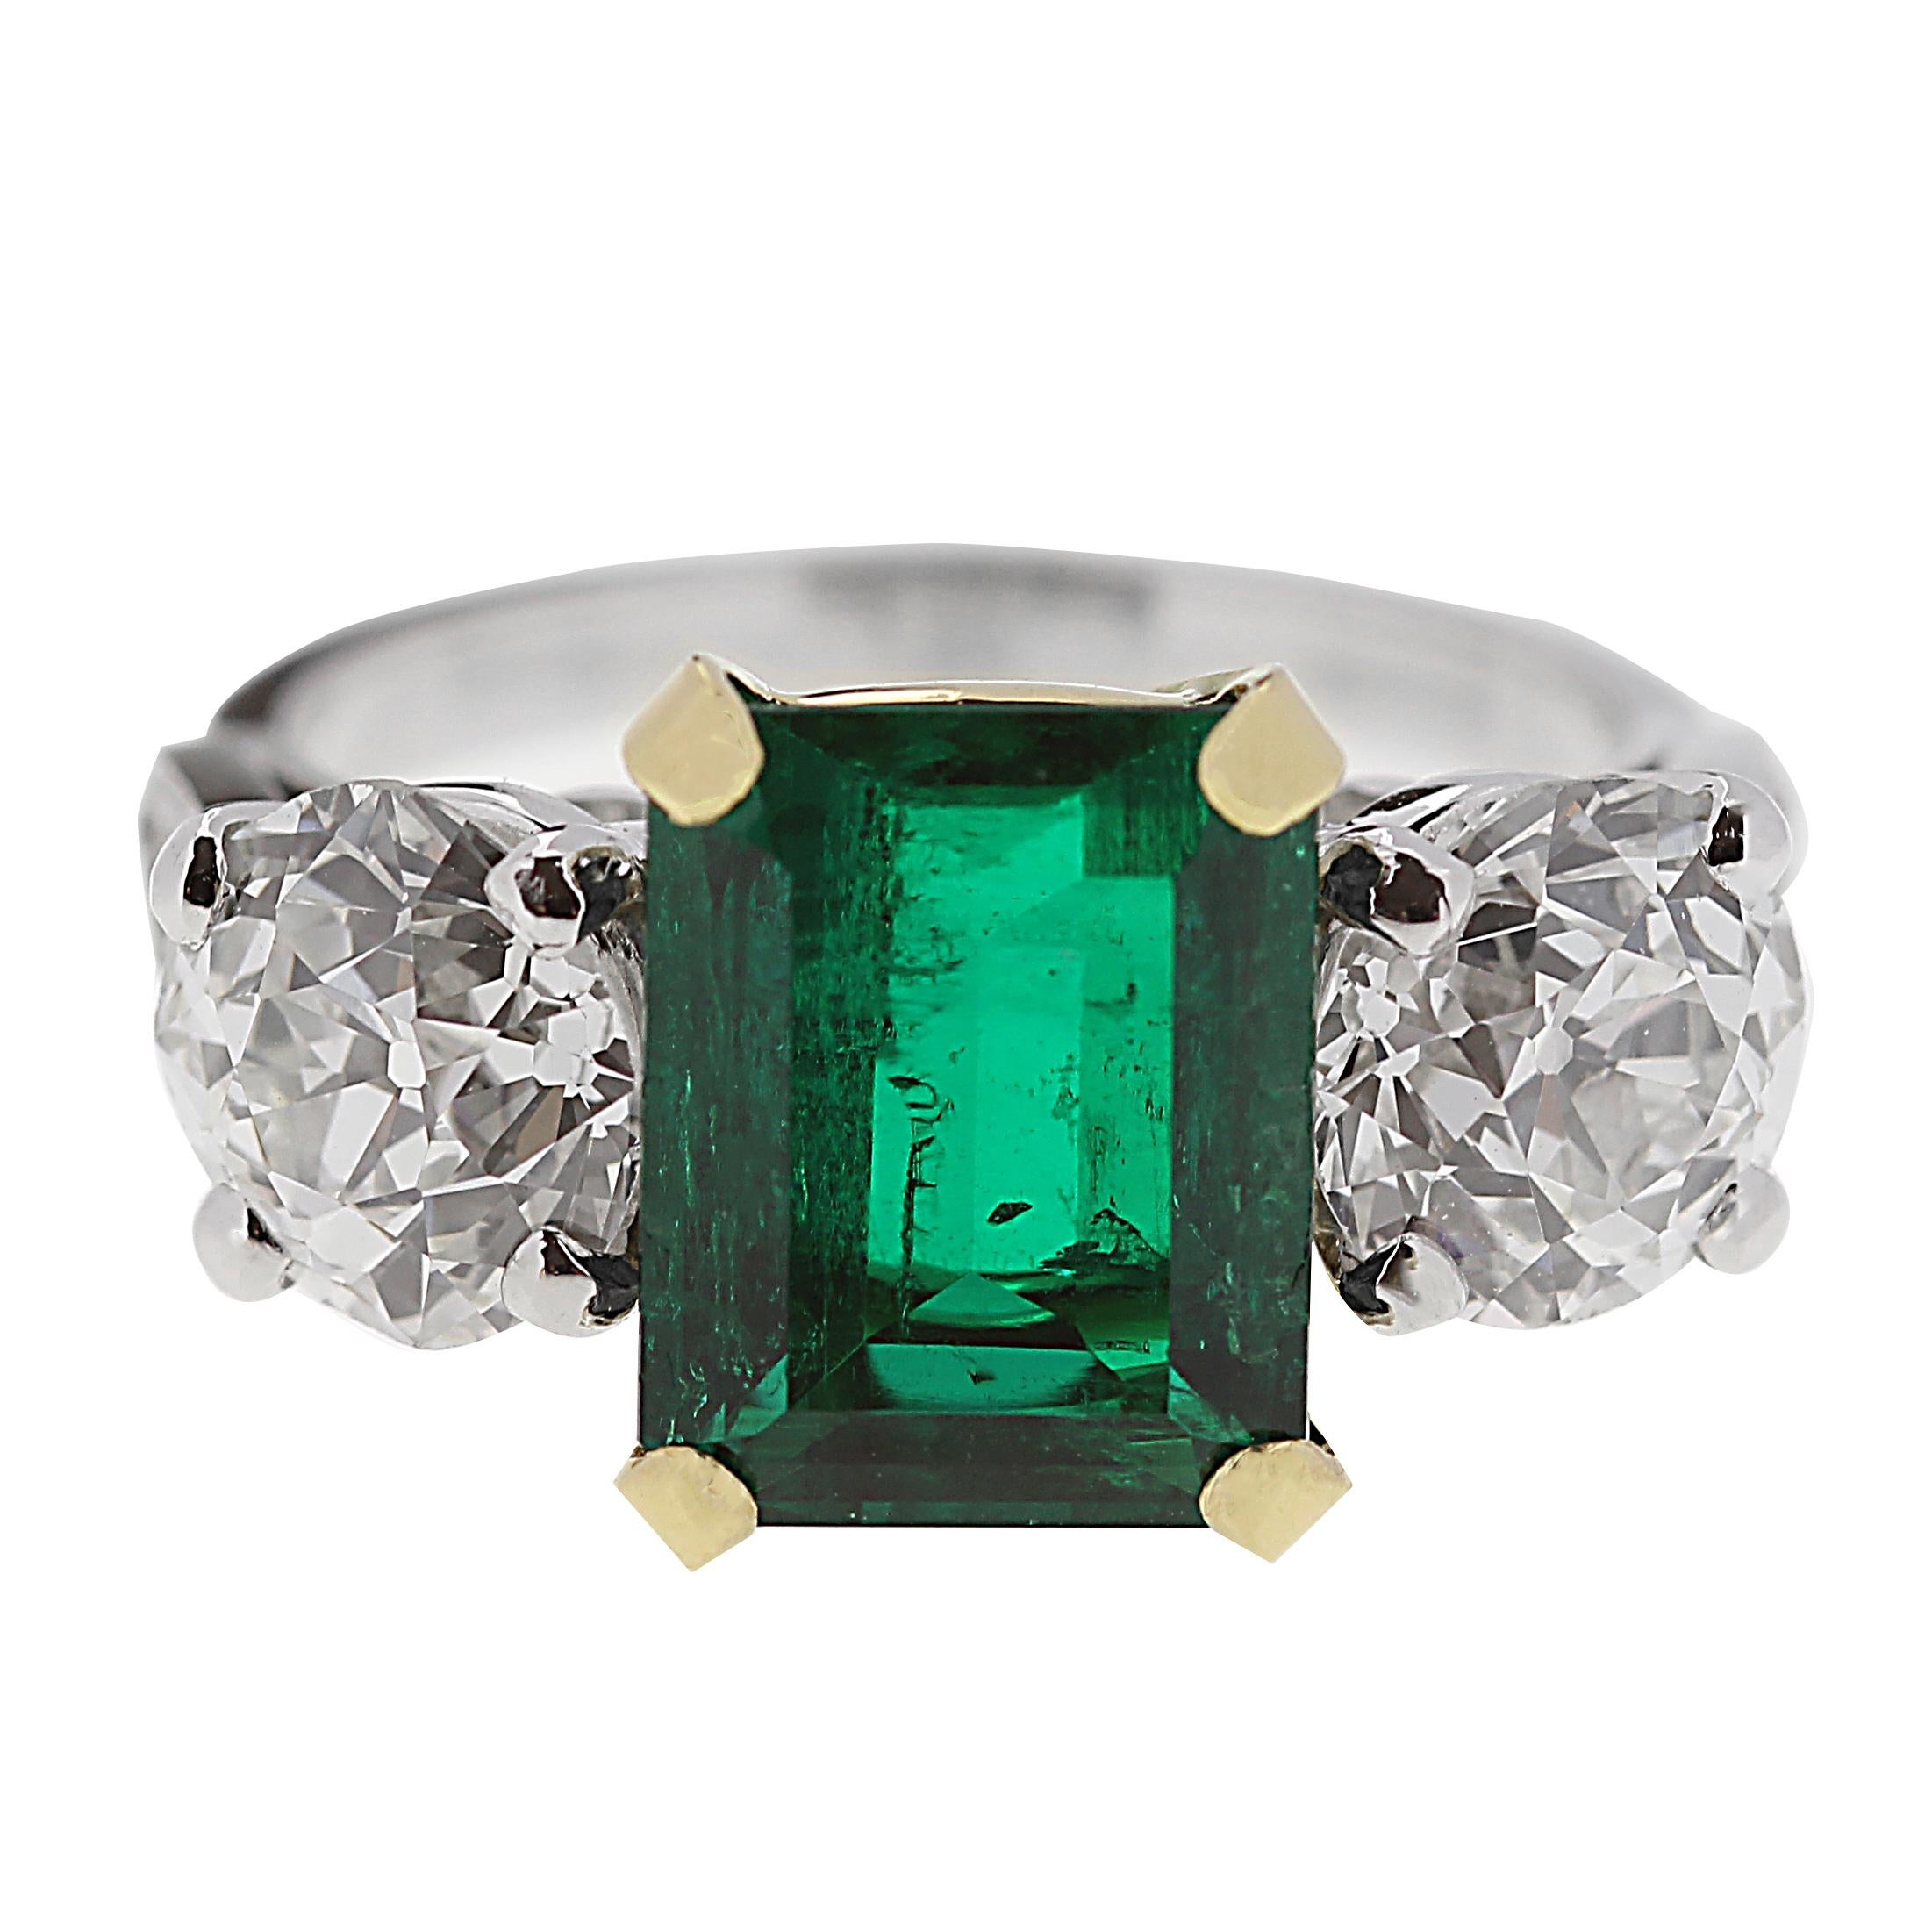 Not your average, but a bold emerald and diamond ring, full of life and sparkles. It’s a rectangular emerald gem encased in gold on a platinum ring. Might I also mention that on the shoulder of the emerald are two old European cut diamonds which